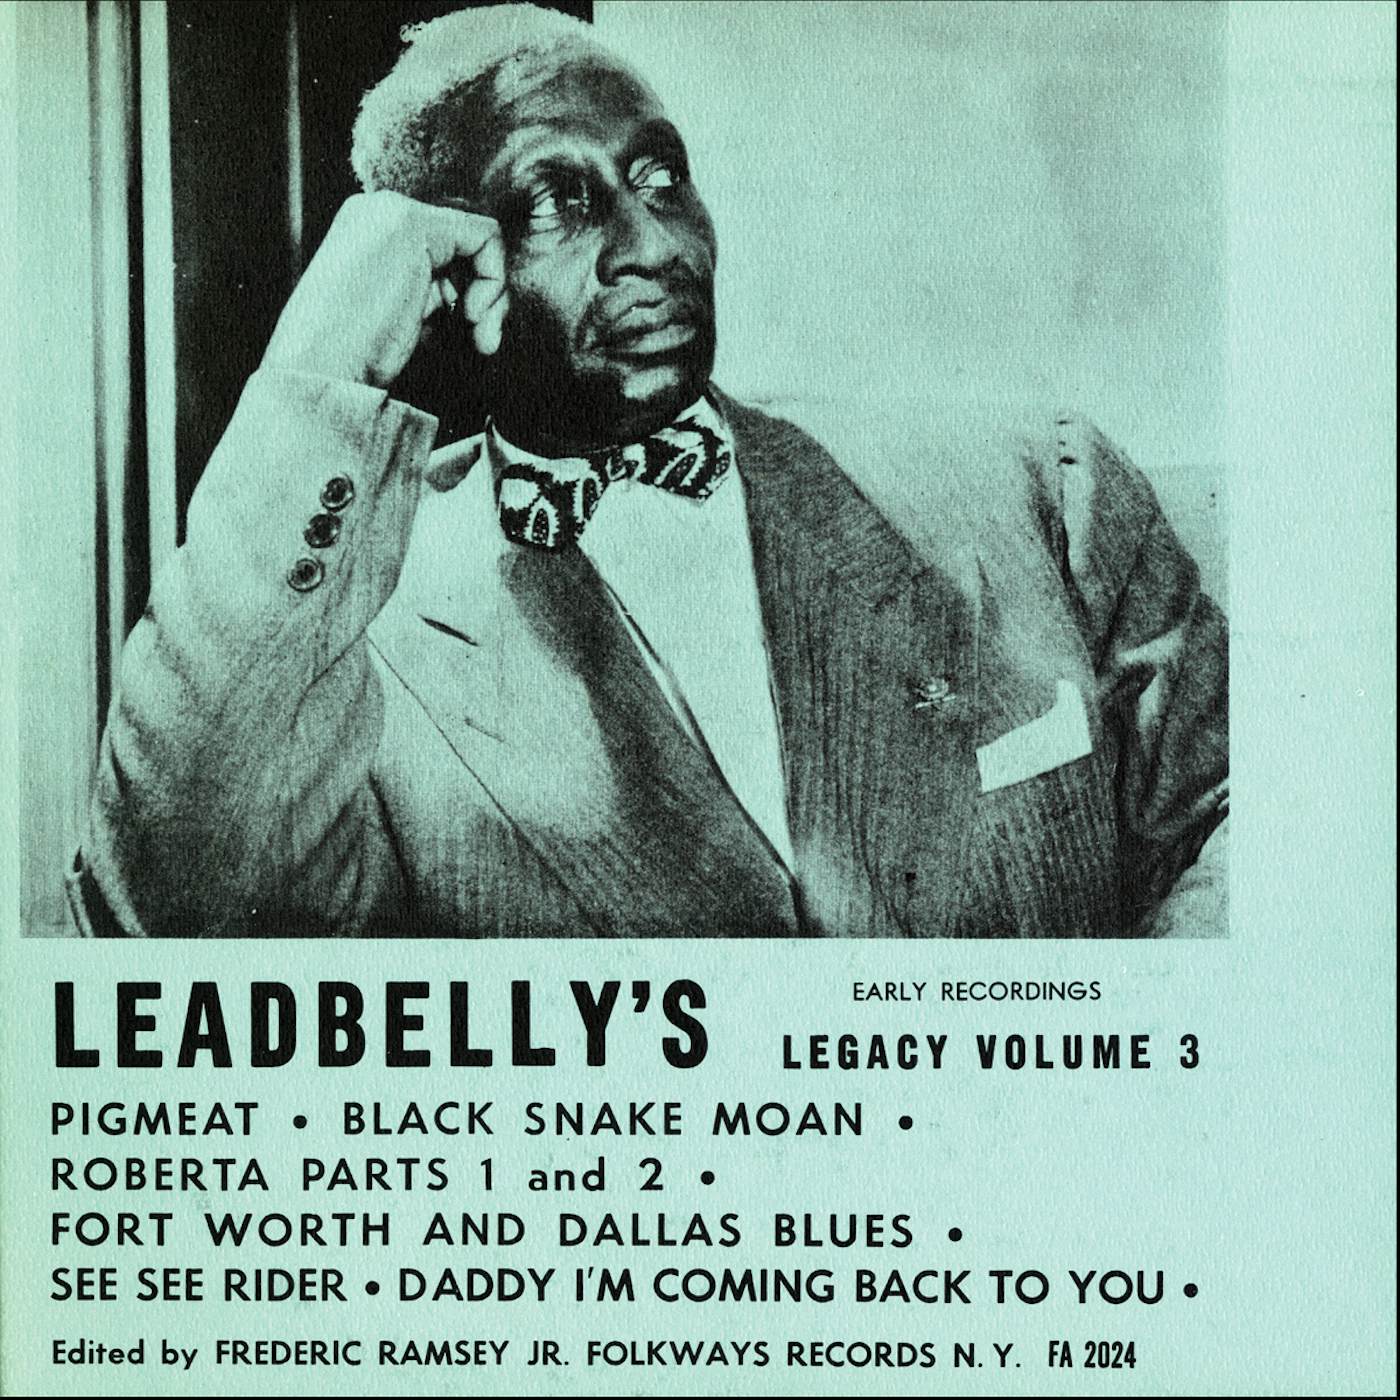 Leadbelly'S LEGACY VOL. 3: EARLY RECORDINGS CD